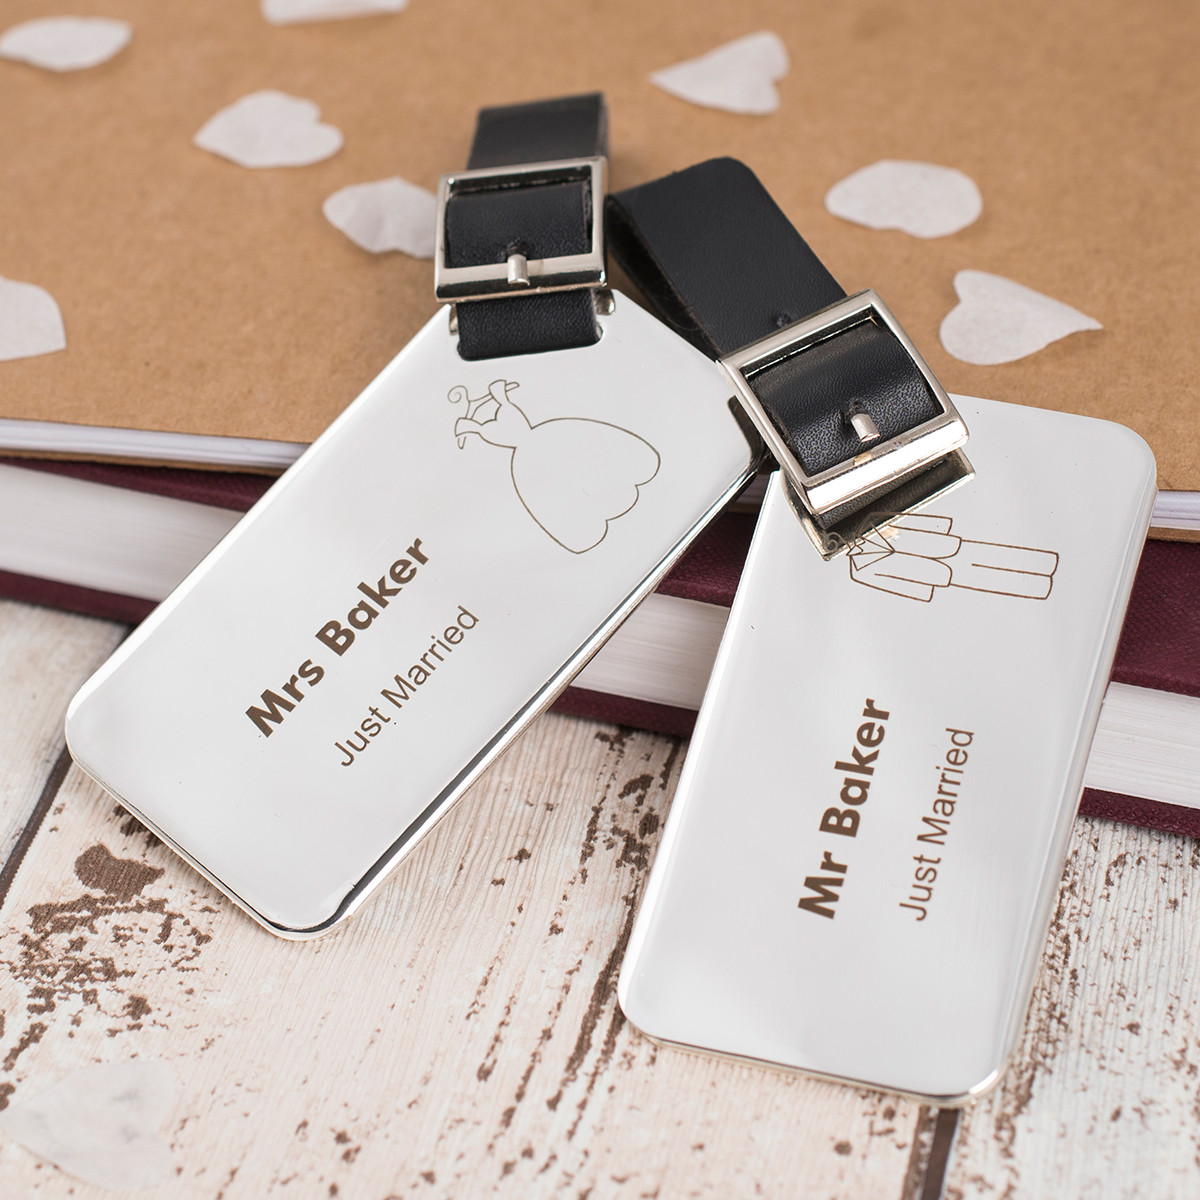 Fun Gift Ideas For Couples
 Wedding Gift Ideas For Couples Who Have Everything